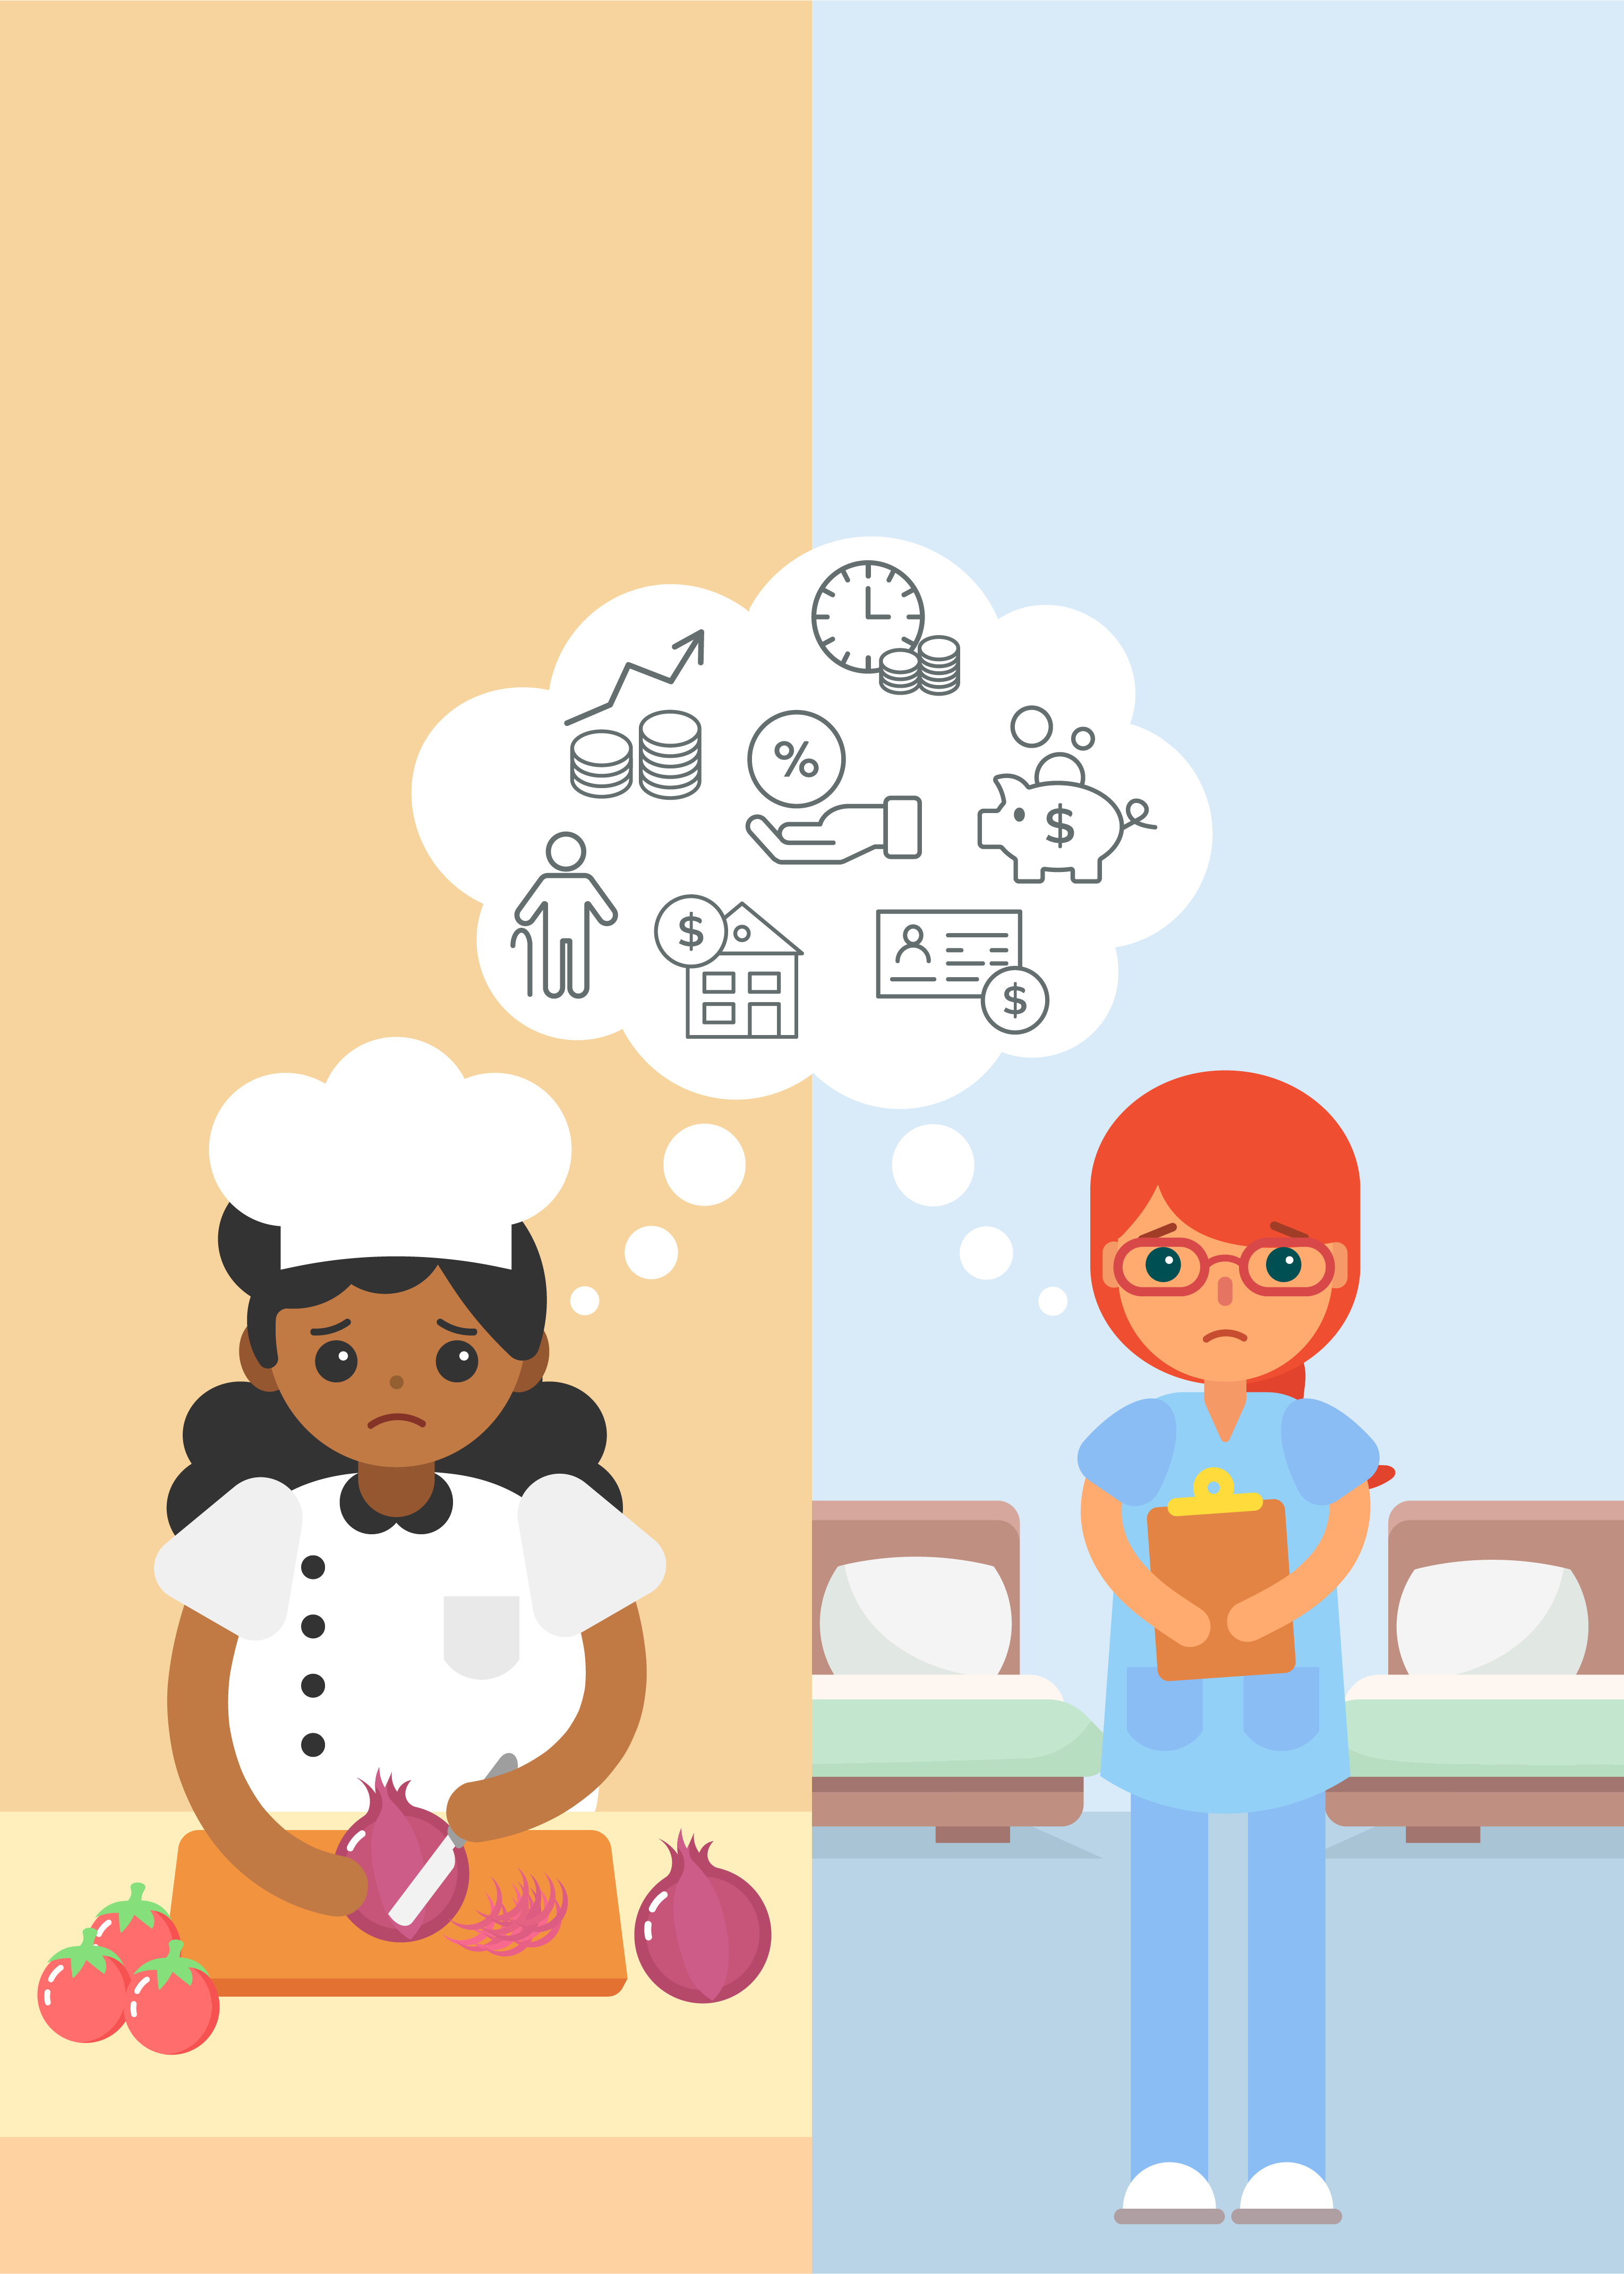 Illustration of a food service worker (left) and caretaker (right), both with concerned expressions